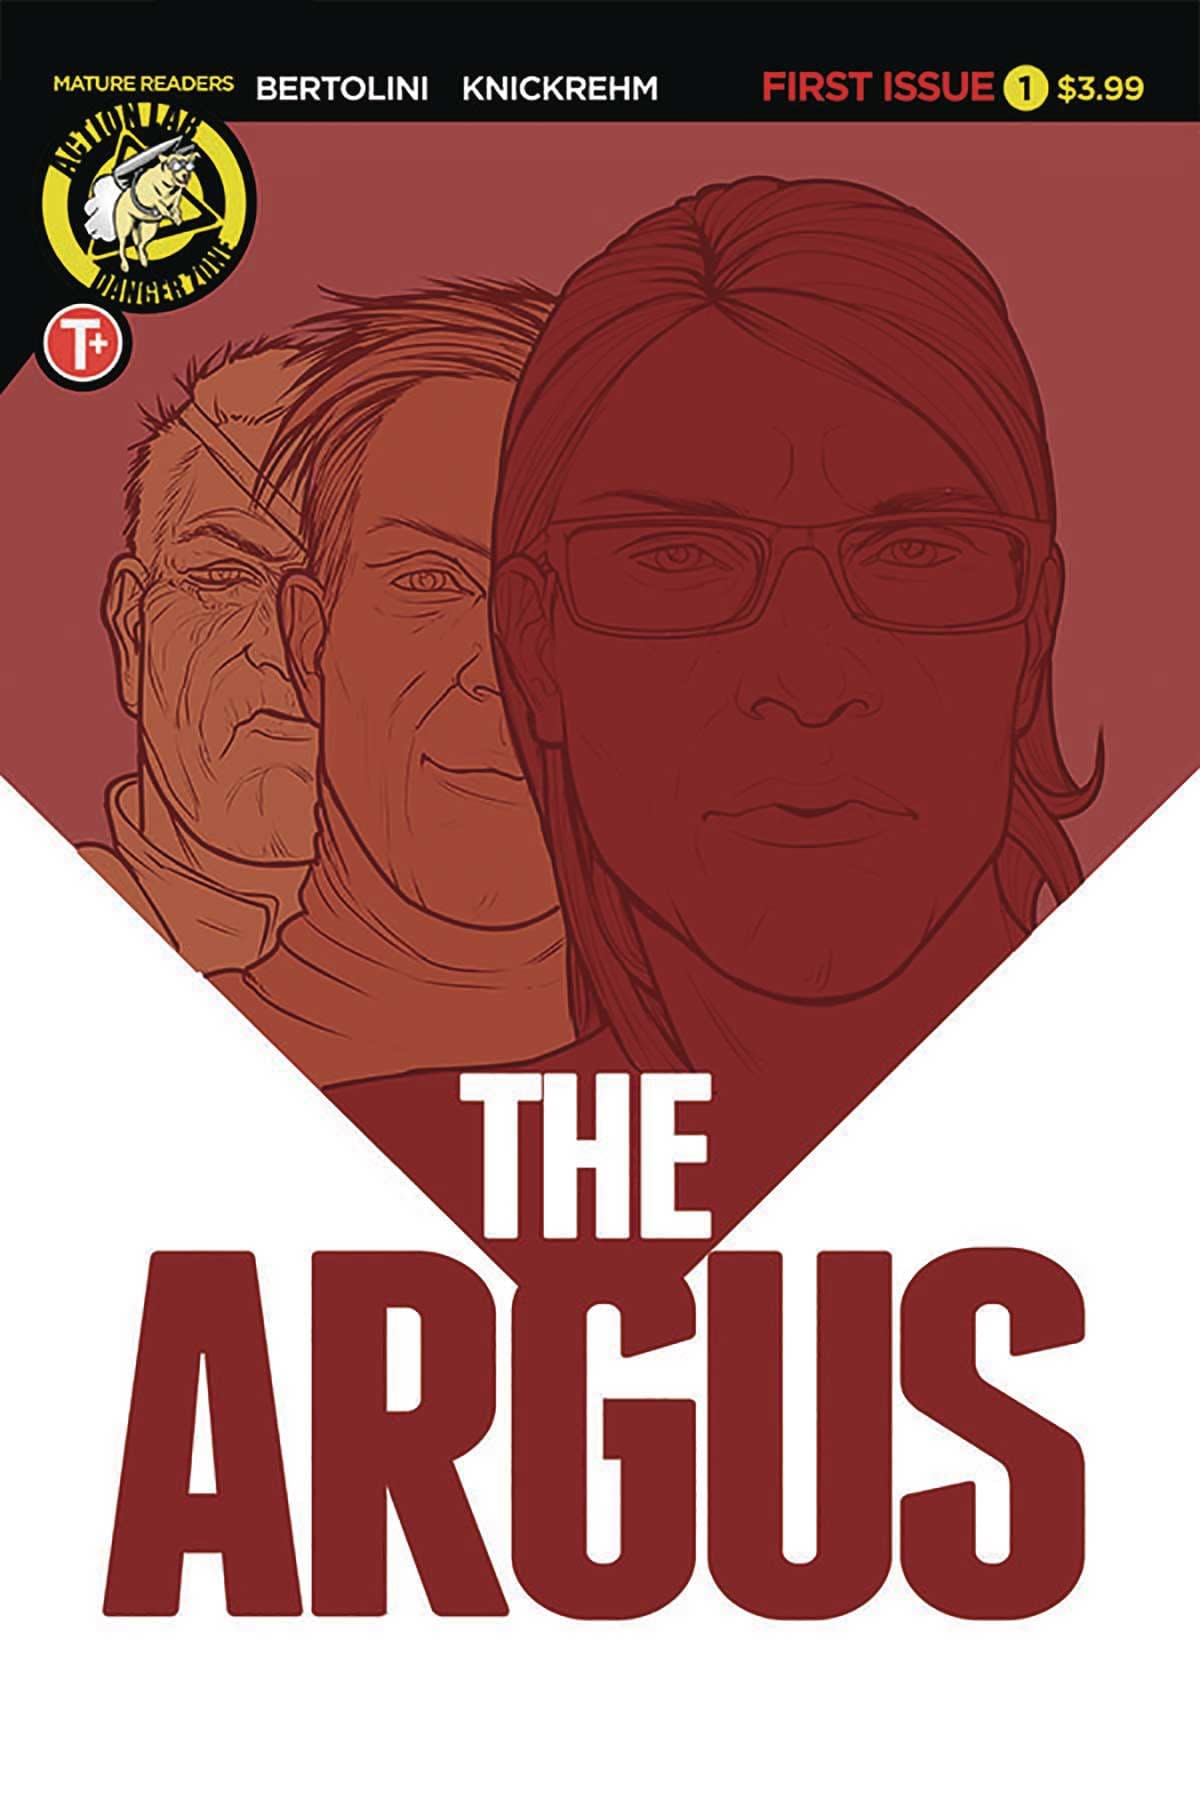 REVIEW: Argus #1 -- "Very Thorough About Setting Up Its Rules For Chronological Excursions"